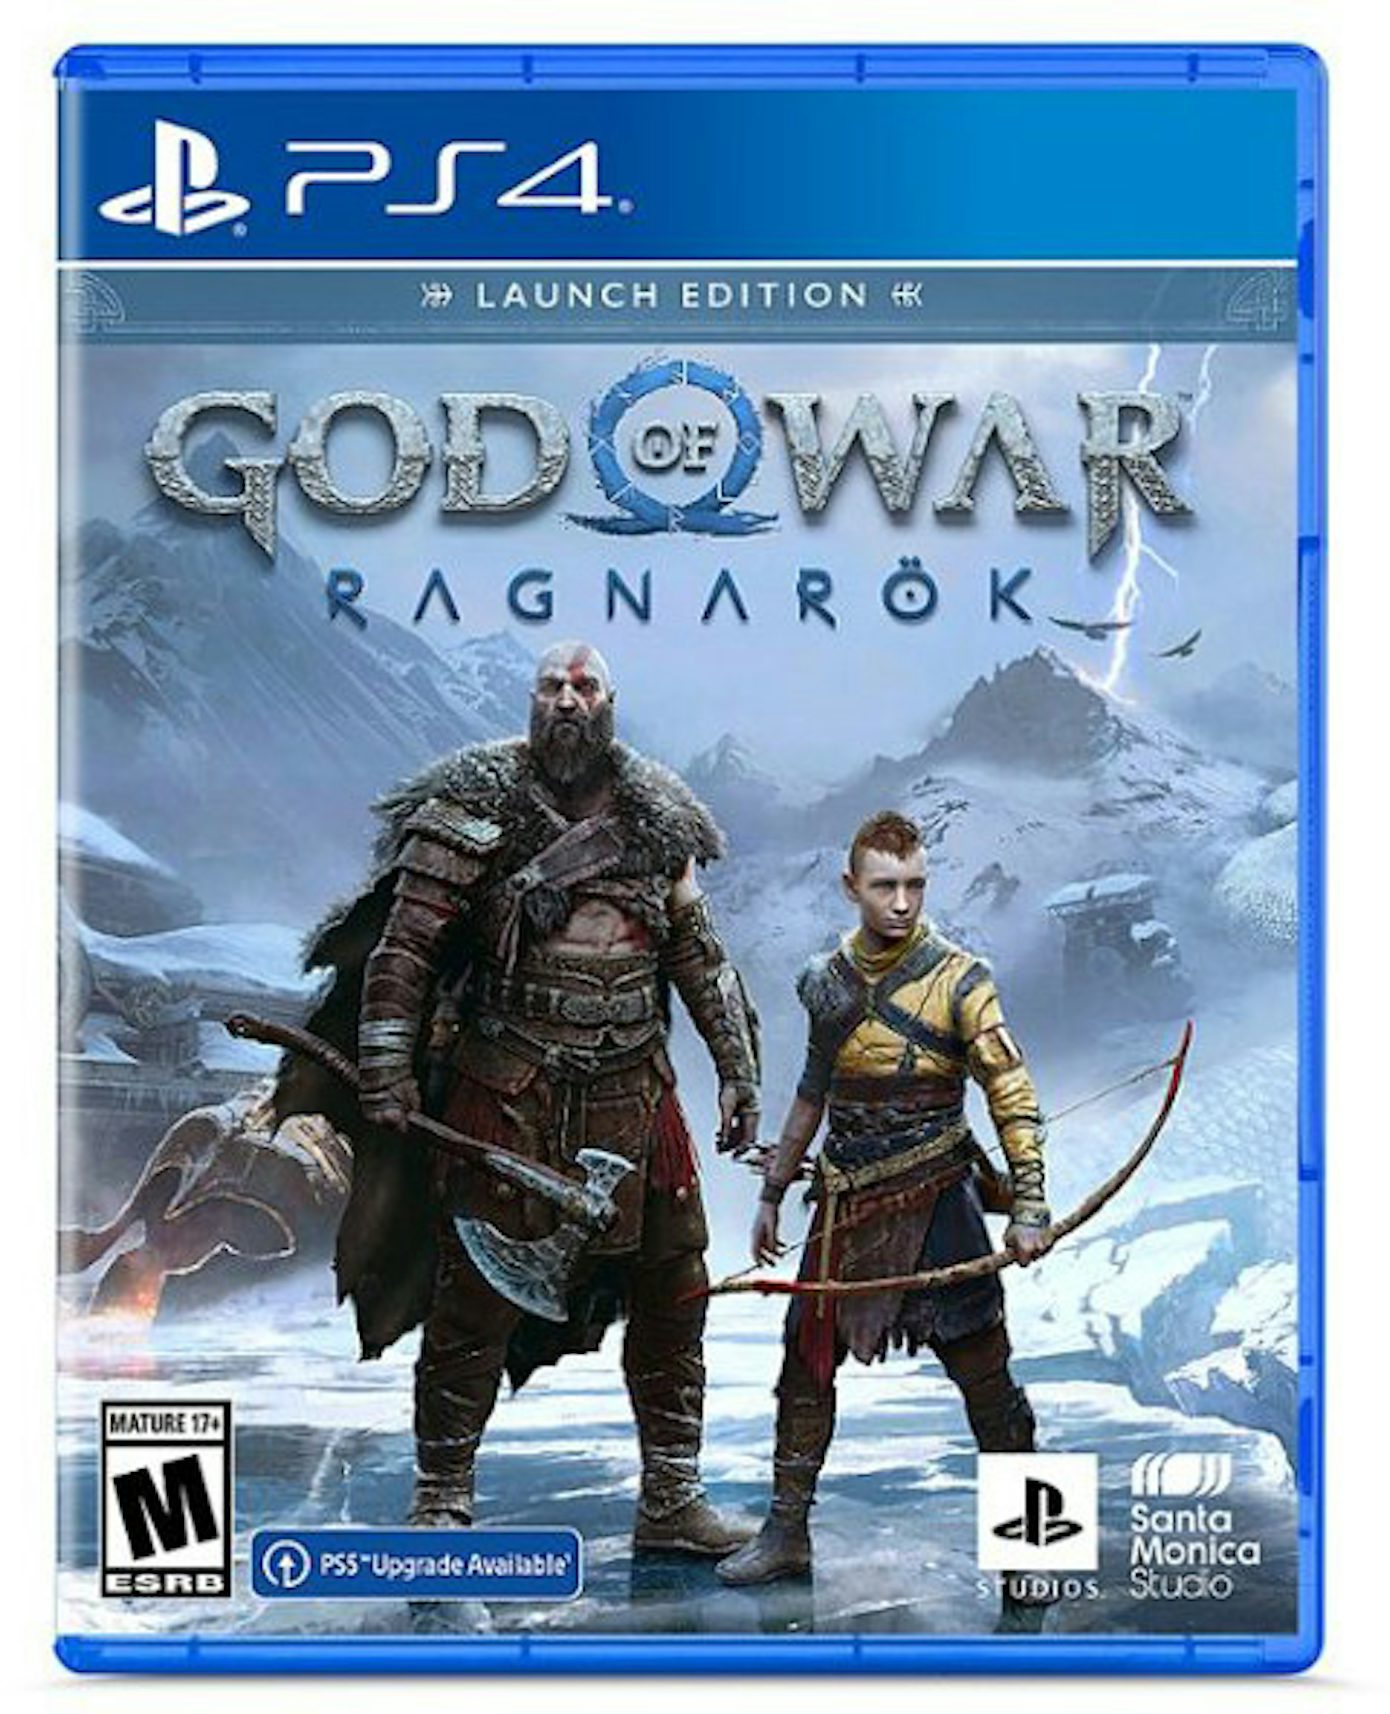 PS5] [PS4] God of War Ragnarok Collector's Edition (main game